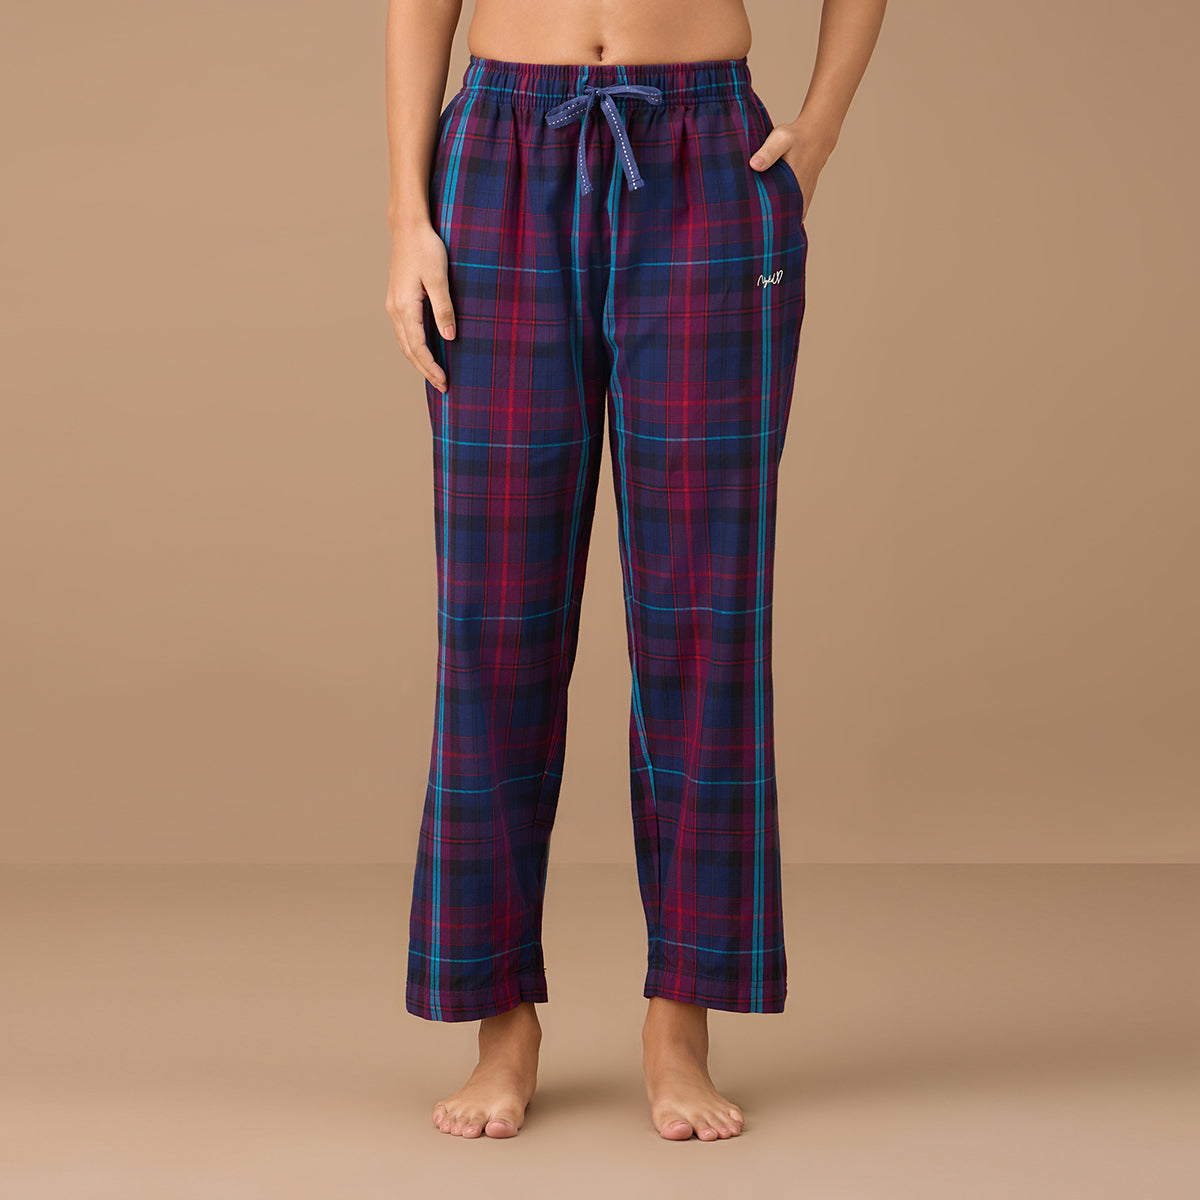 Nykd By Nykaa Super Comfy Cotton Relax Fit Pajama-NYS141-Navy Black Plaid